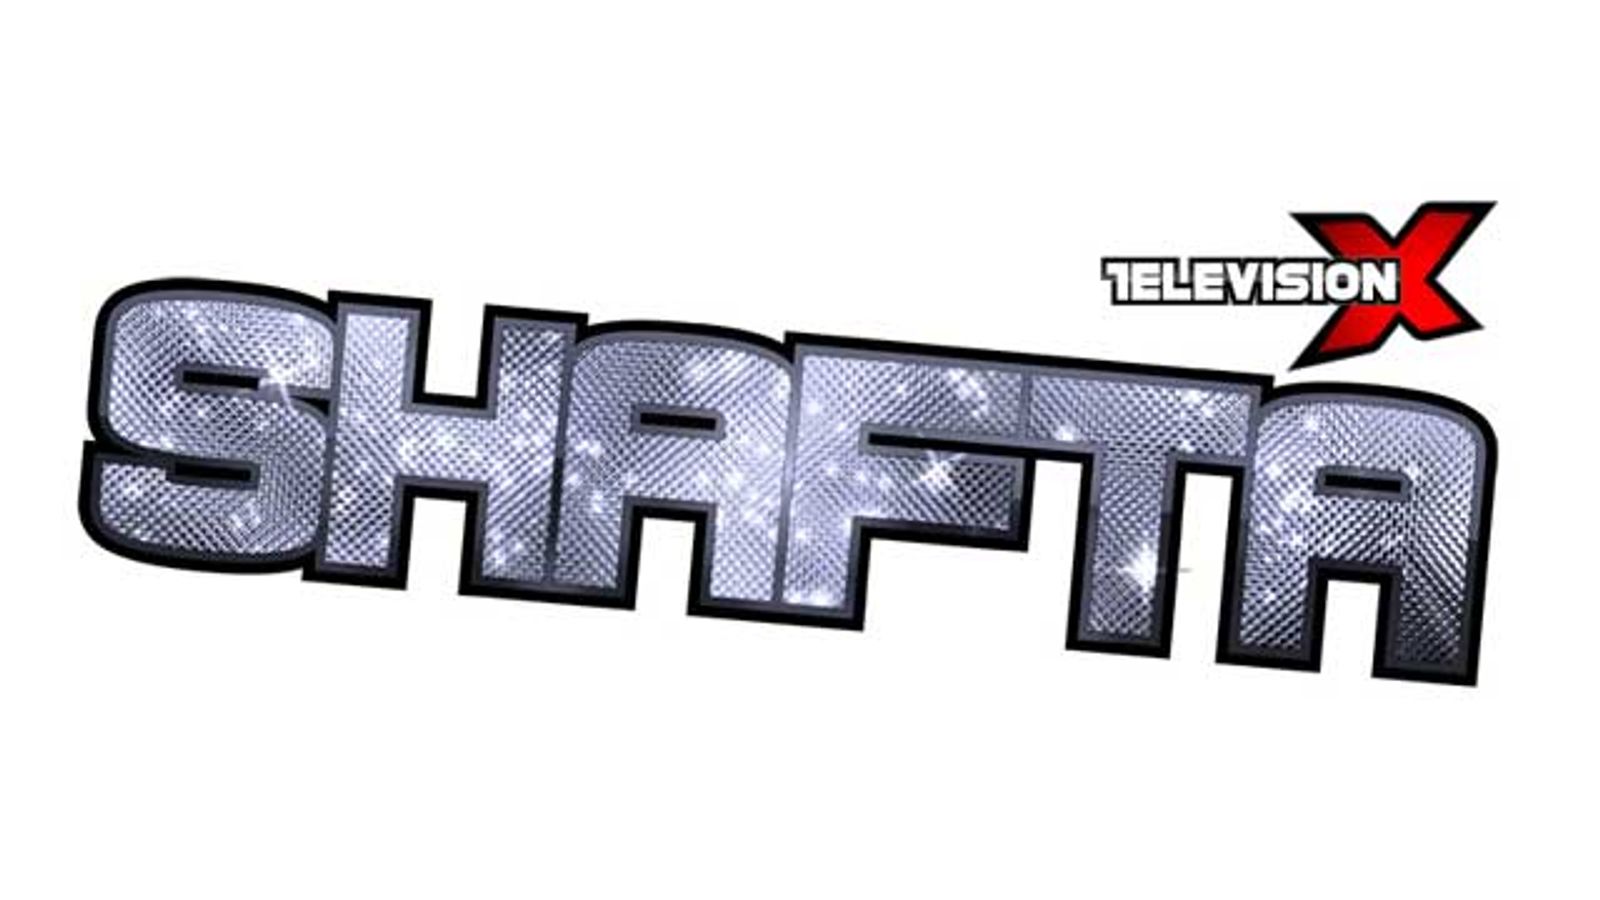 Television X Announce Nominees for 2012 SHAFTA Awards